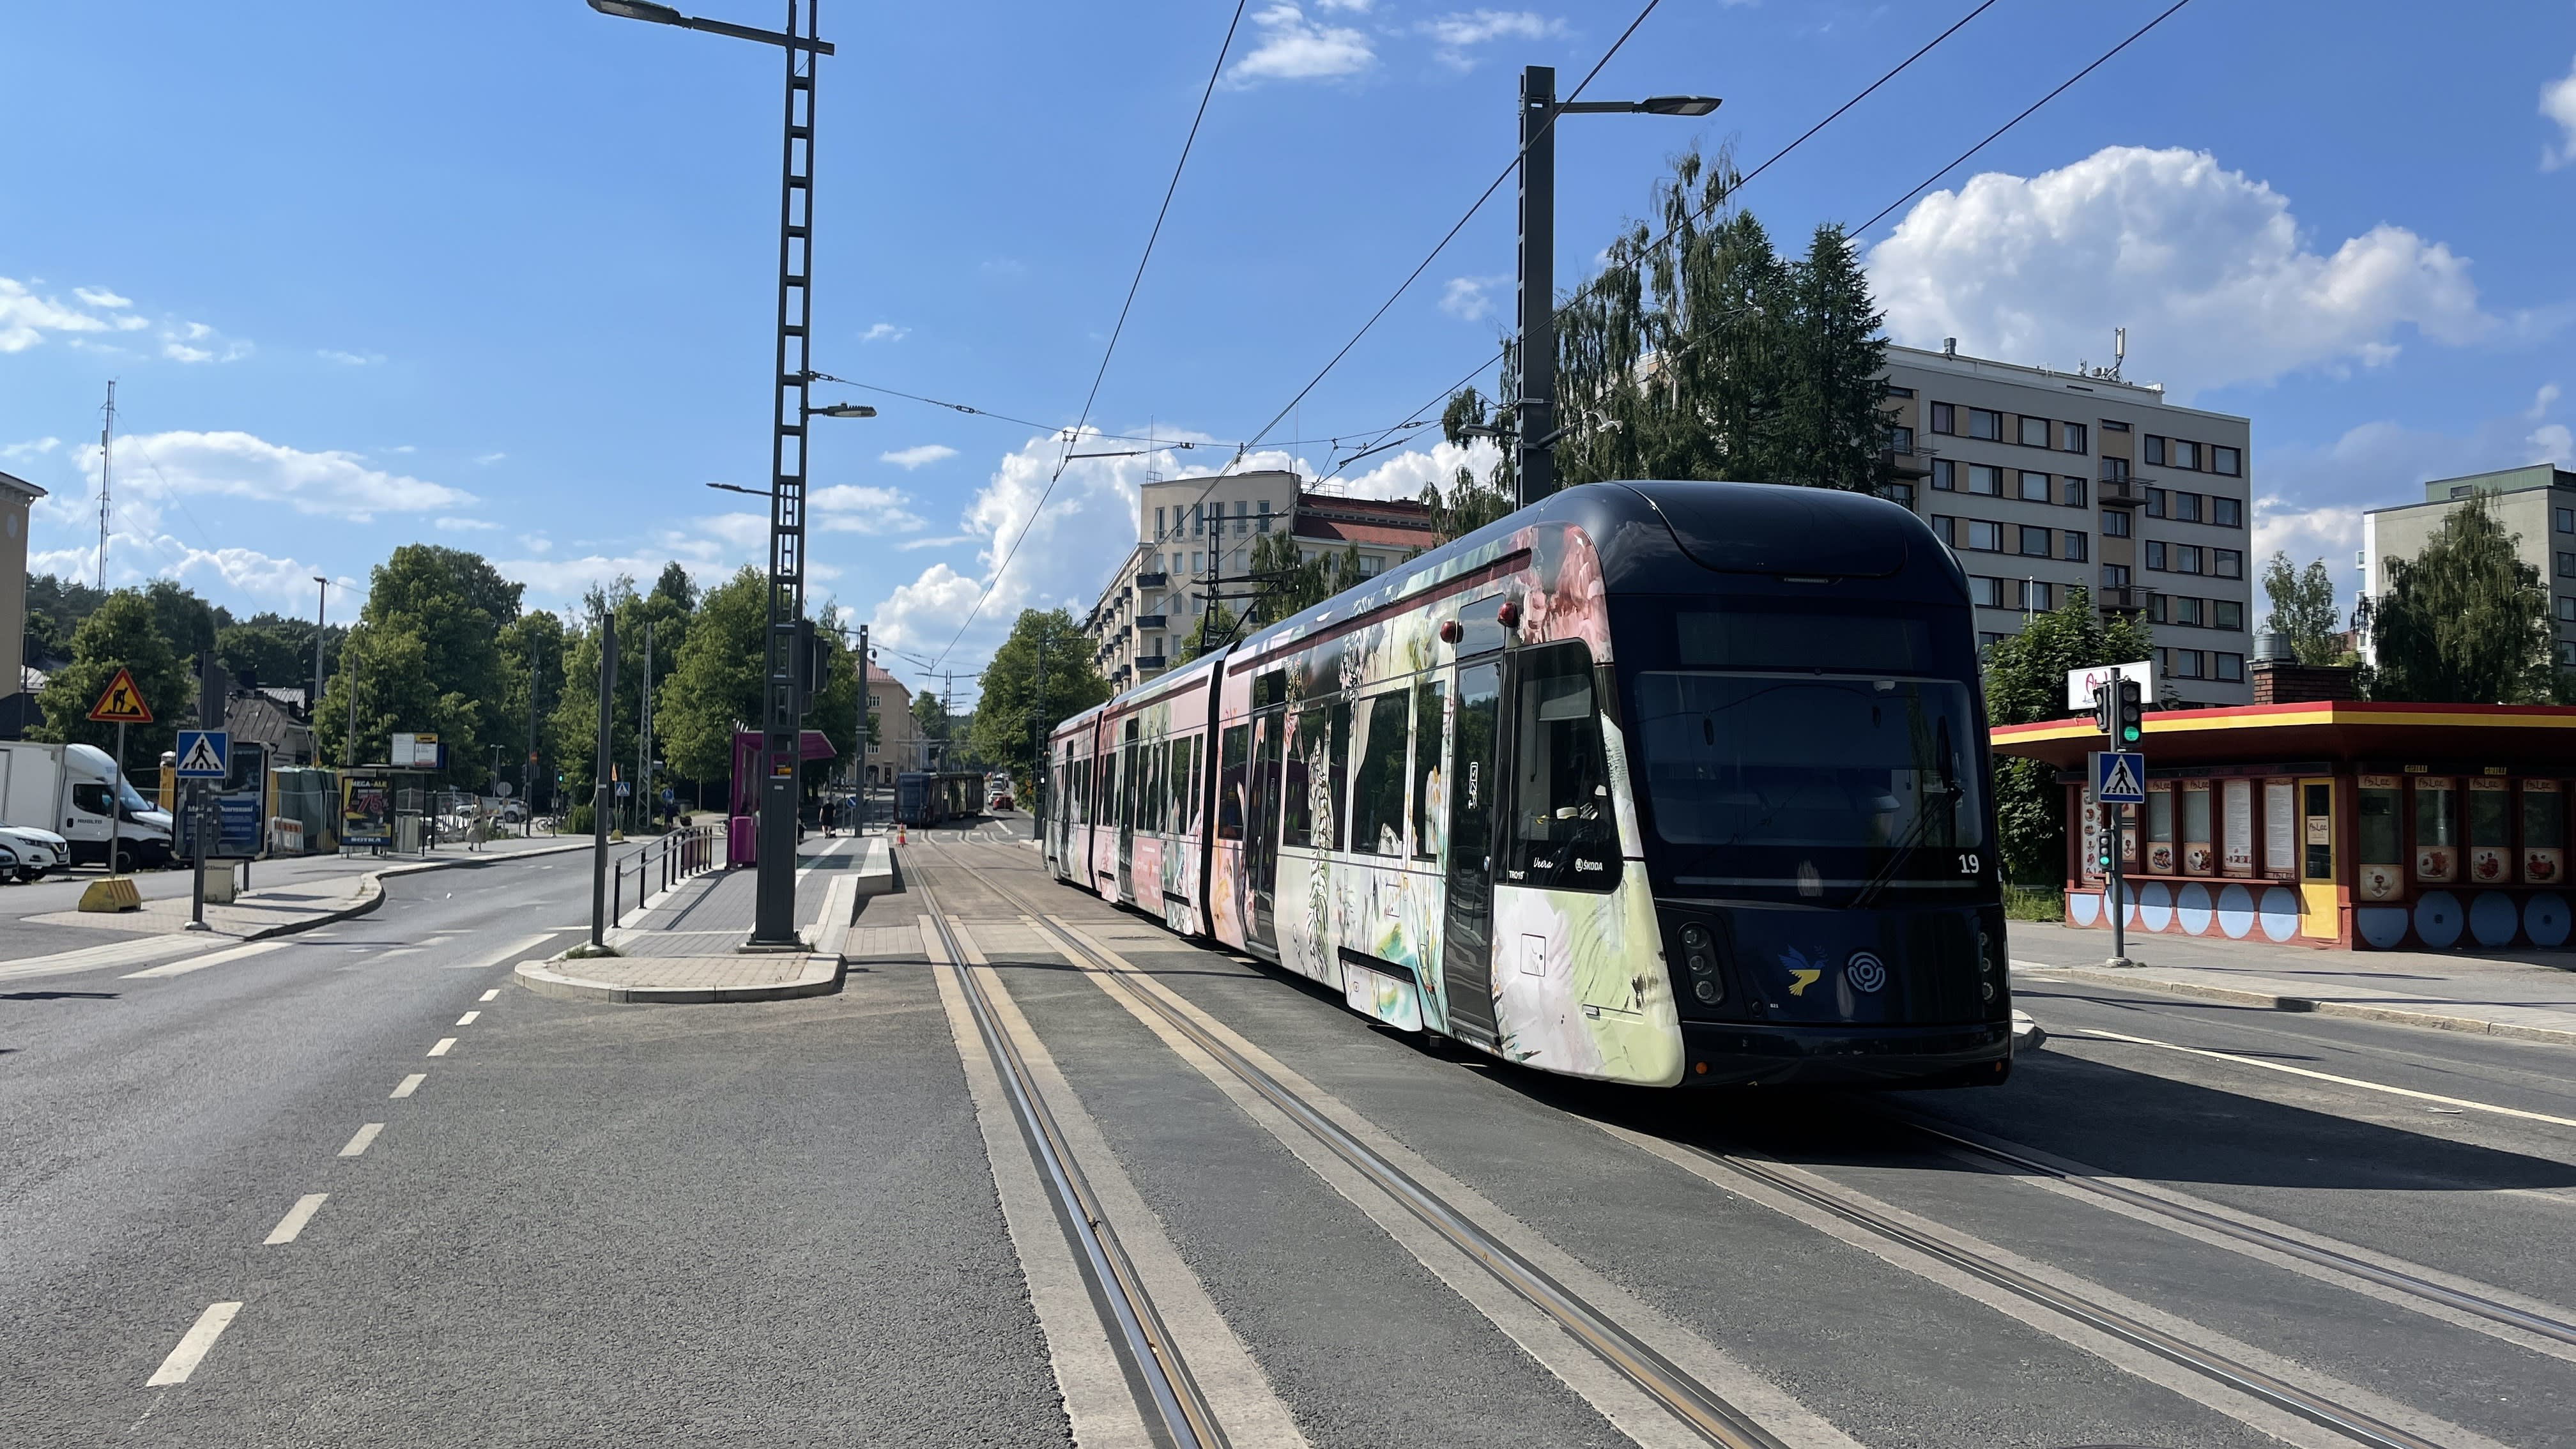 In the opening year of the Tampere tram, 10 million trips were made